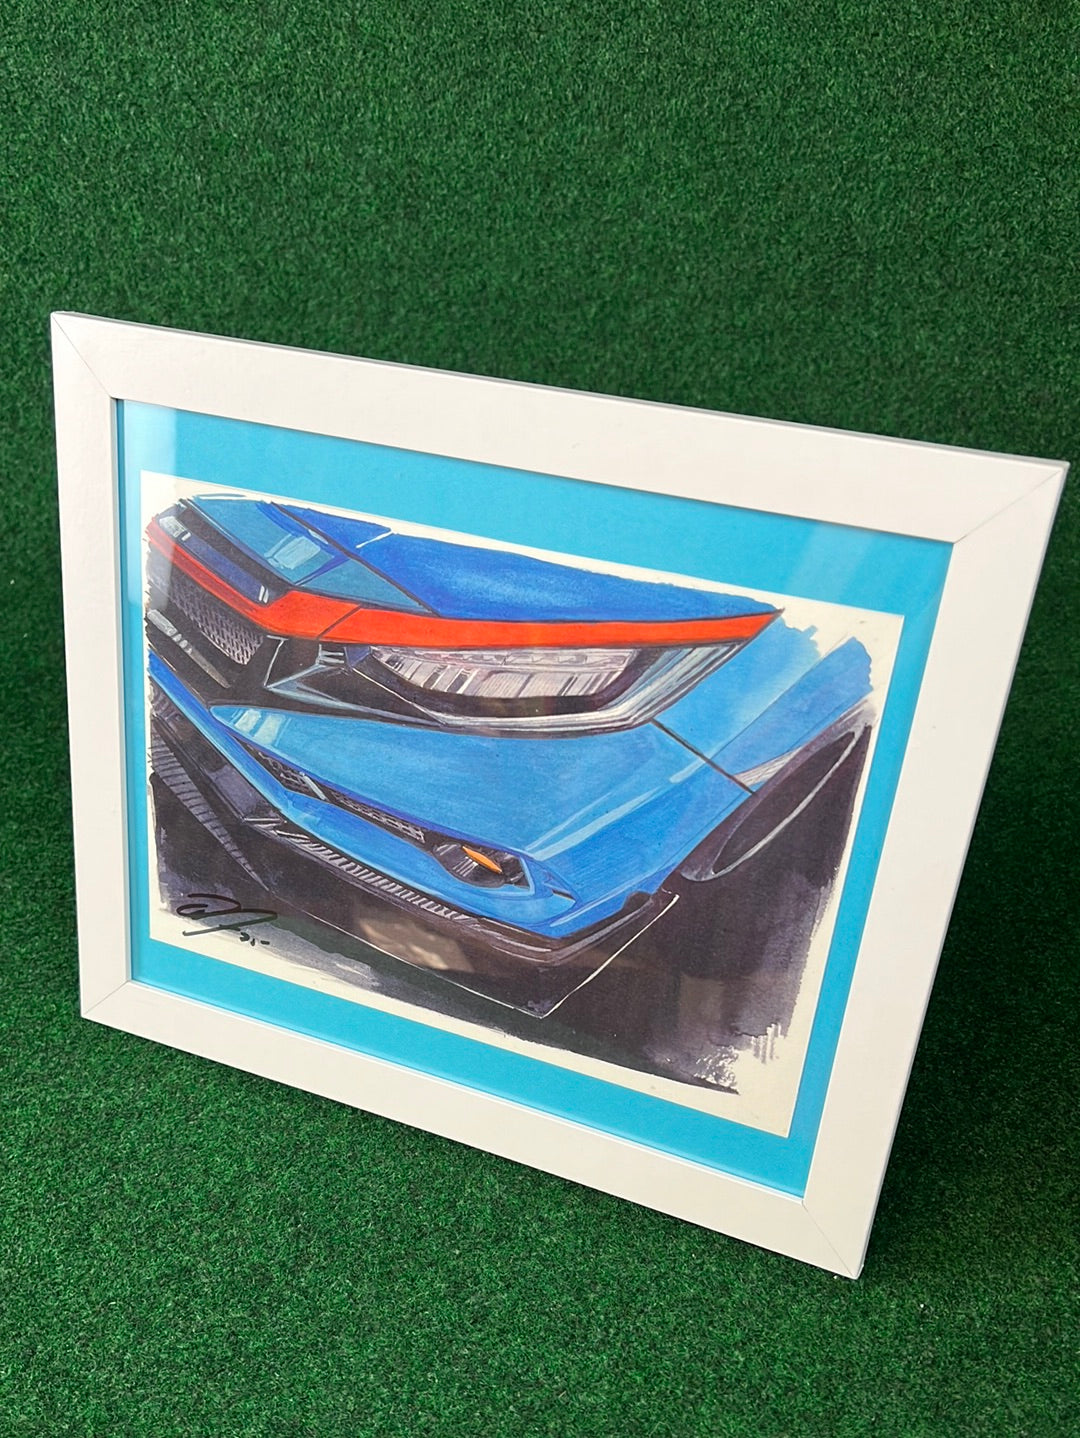 UNDERDOGZ - Blue Honda Civic Type R FK8 (White Frame) Hand Drawn, Watercolor Painted & Signed Print